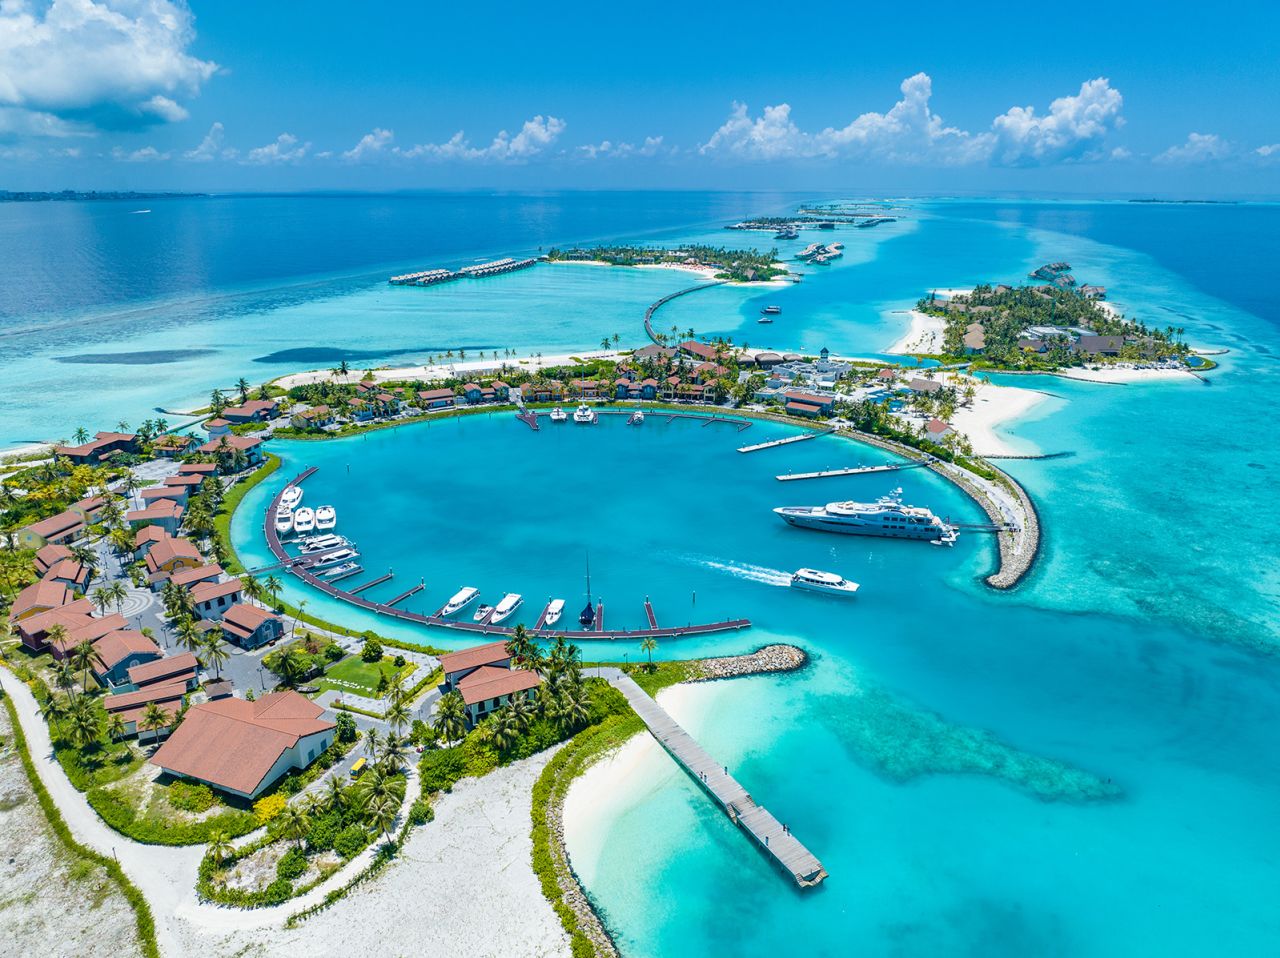 <strong>CROSSROADS Maldives: </strong>Opened in 2019,  CROSSROADS Maldives is the country's first integrated, multi-island resort complex. It features two resorts, more than a dozen restaurants, a beach club for day use and a marina.  